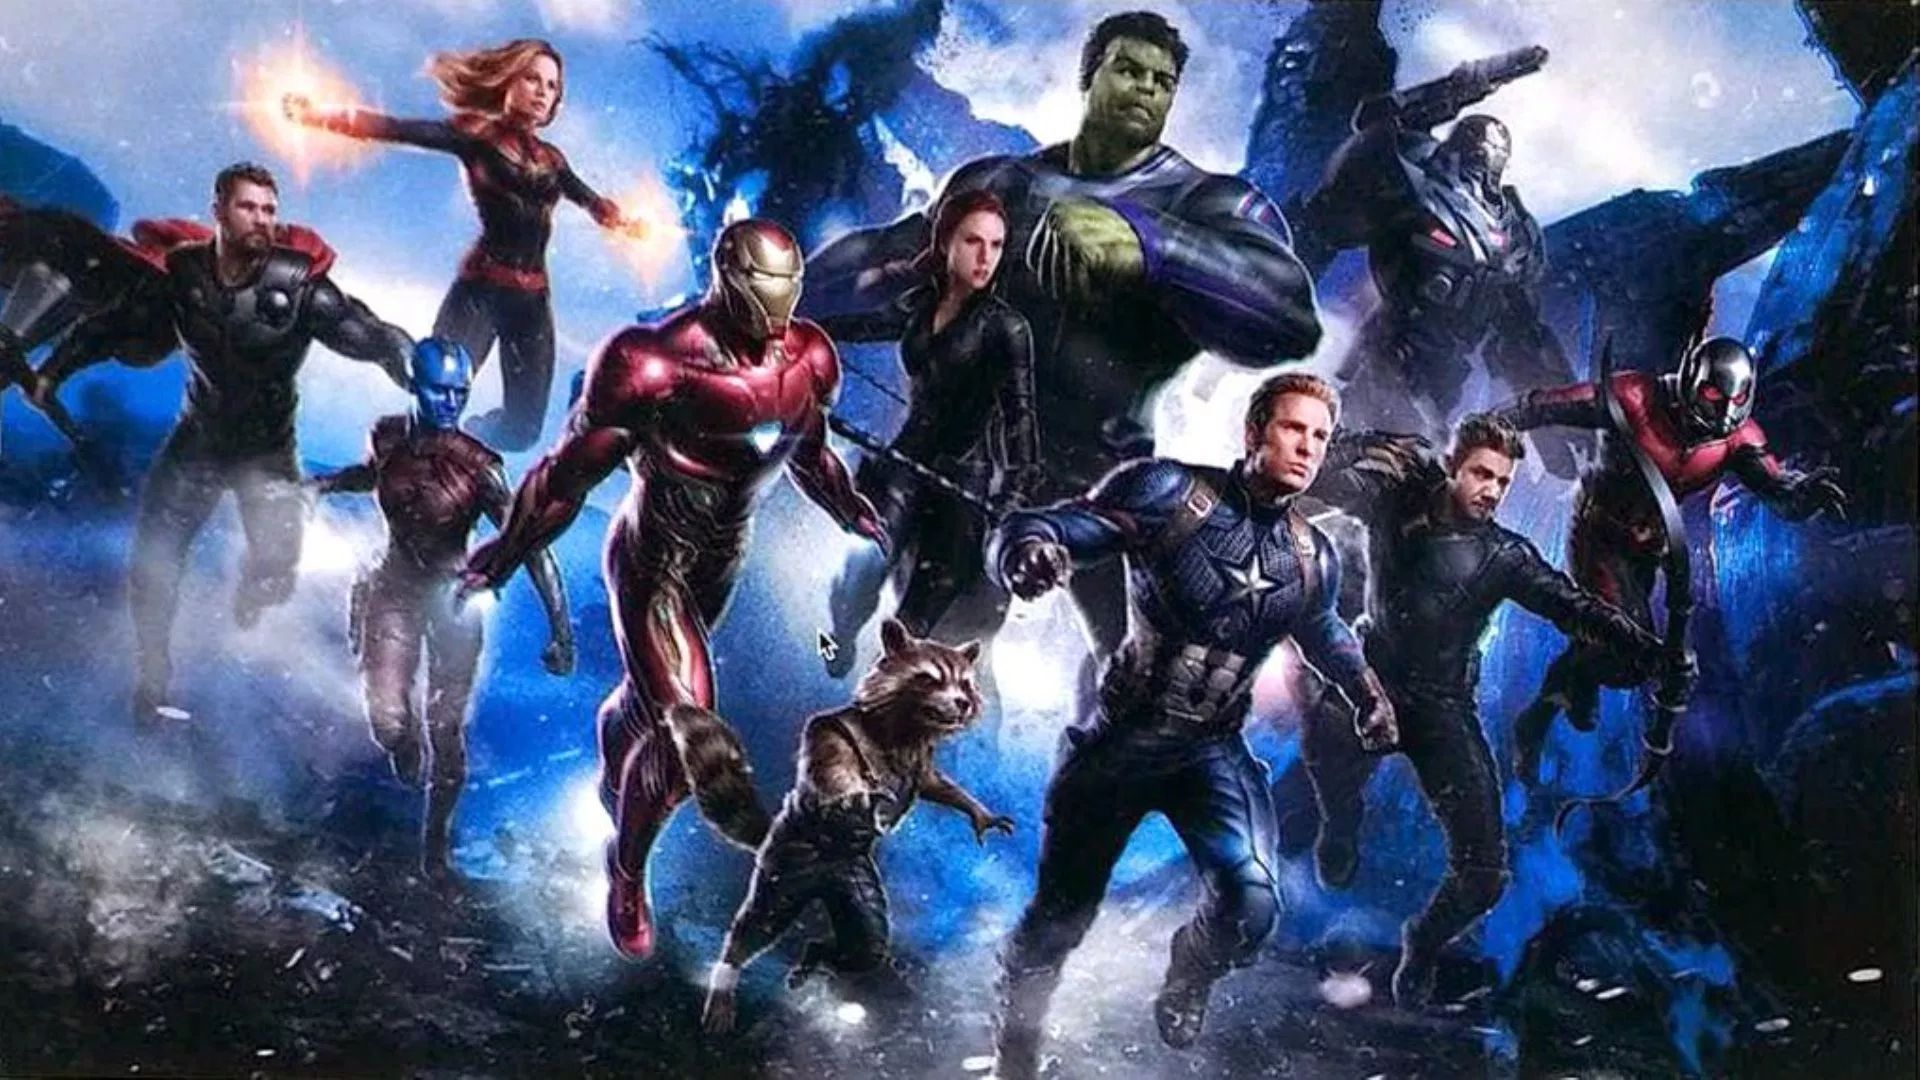 The Official Trailer Of Avengers 4 Is Going To Launch Tomorrow And We Can't Keep Calm